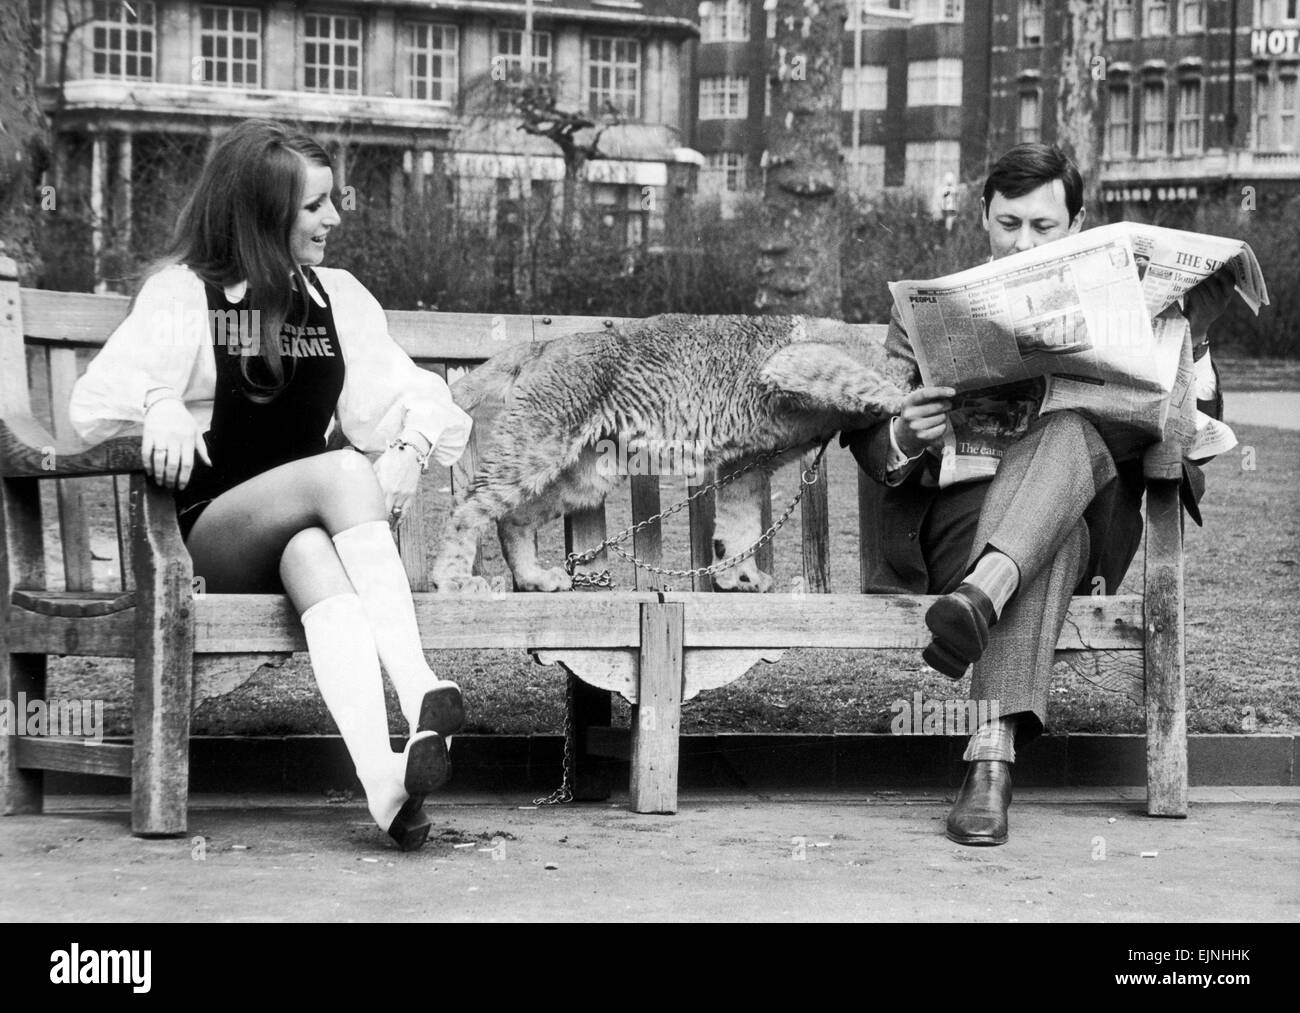 John reads on. Sales representative John Stonehouse just wants to read his Sunday paper. So he sat himself down on a bench in Russell Square and started to browse. With characteristic British reserve John did not allow himself to be distracted when this pretty young girl came and sat beside him. He did not like to be so rude to actually look at her. But there certainly did seem to be something a bit odd about the 'dog' she had with her. And what's more the wretched creature seemed determined to clamber all over him. Still, one must be British about these things - the girl, 22 year old Adrienn Stock Photo